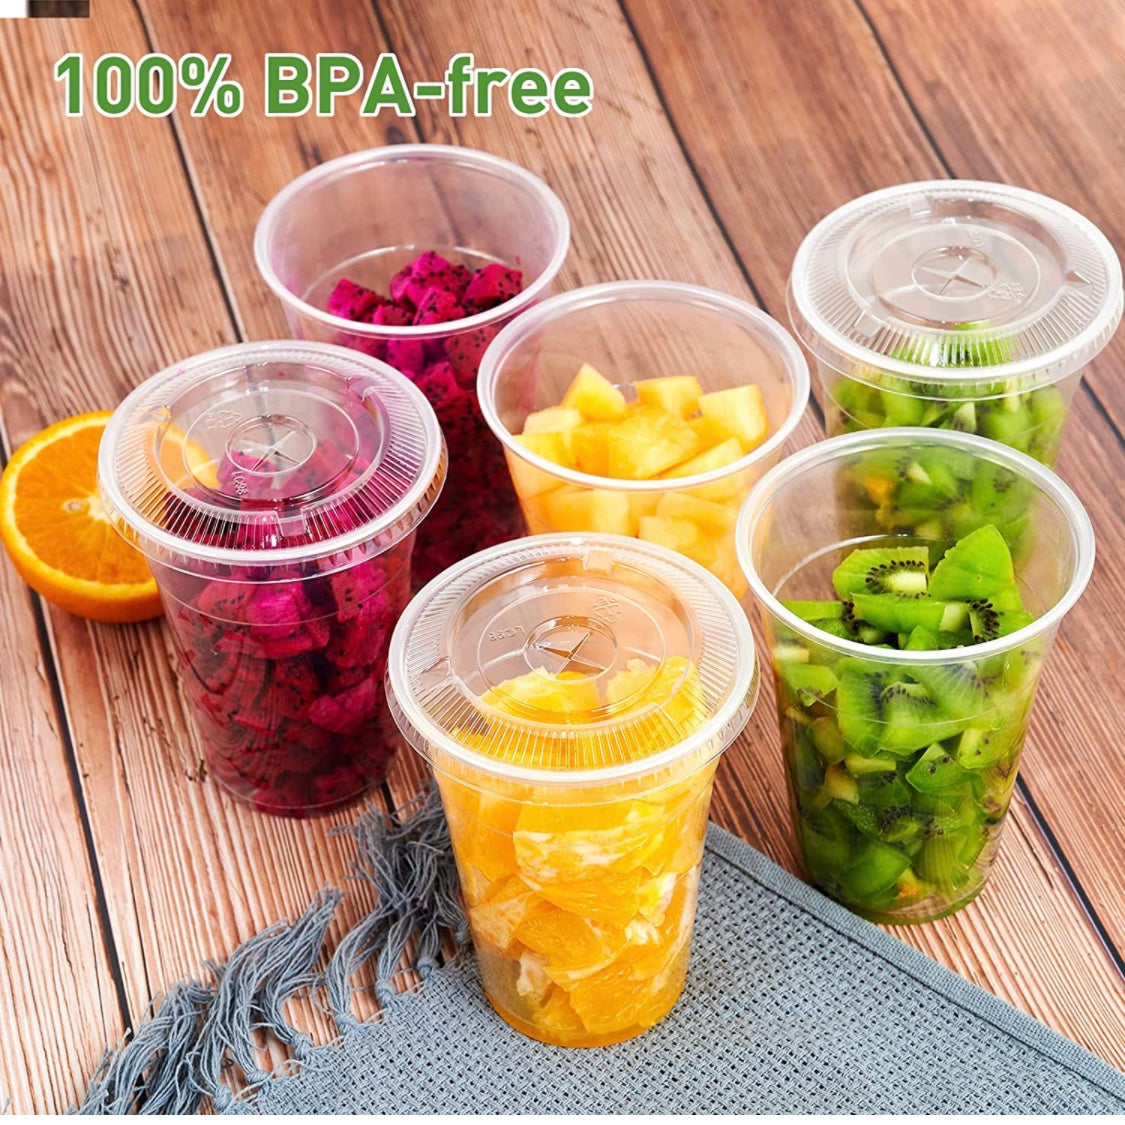 16 Oz Disposable Plastic Clear Cups with Flat Lids with Straw Slot BPA –  BBing Store